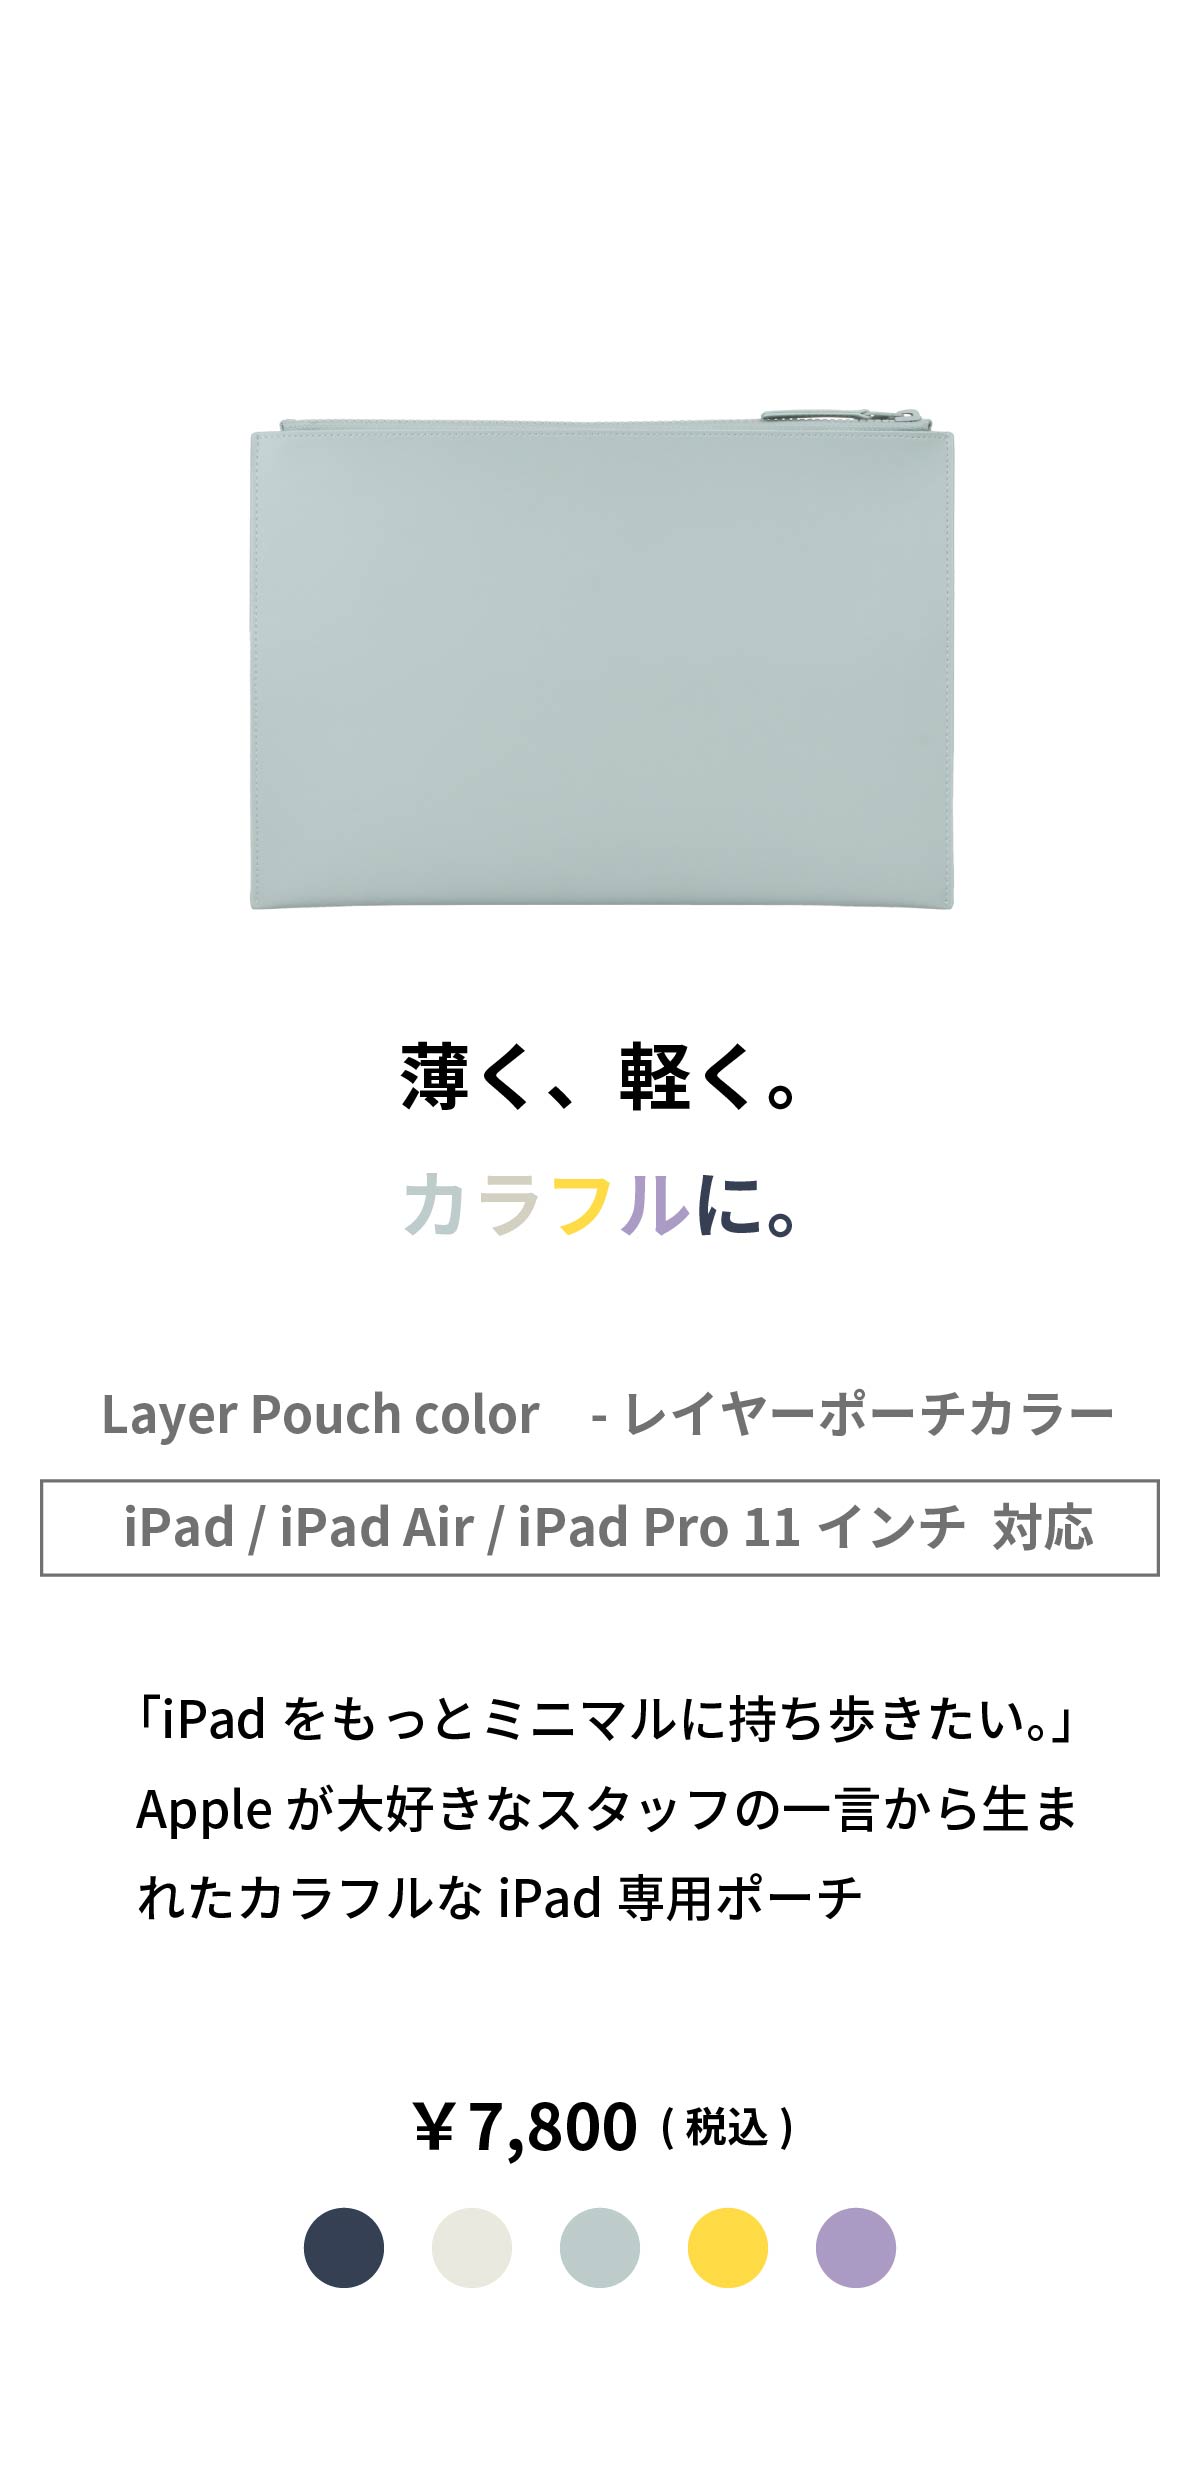 aso　Layer Pouch レイヤーポーチ lp-v179 黒